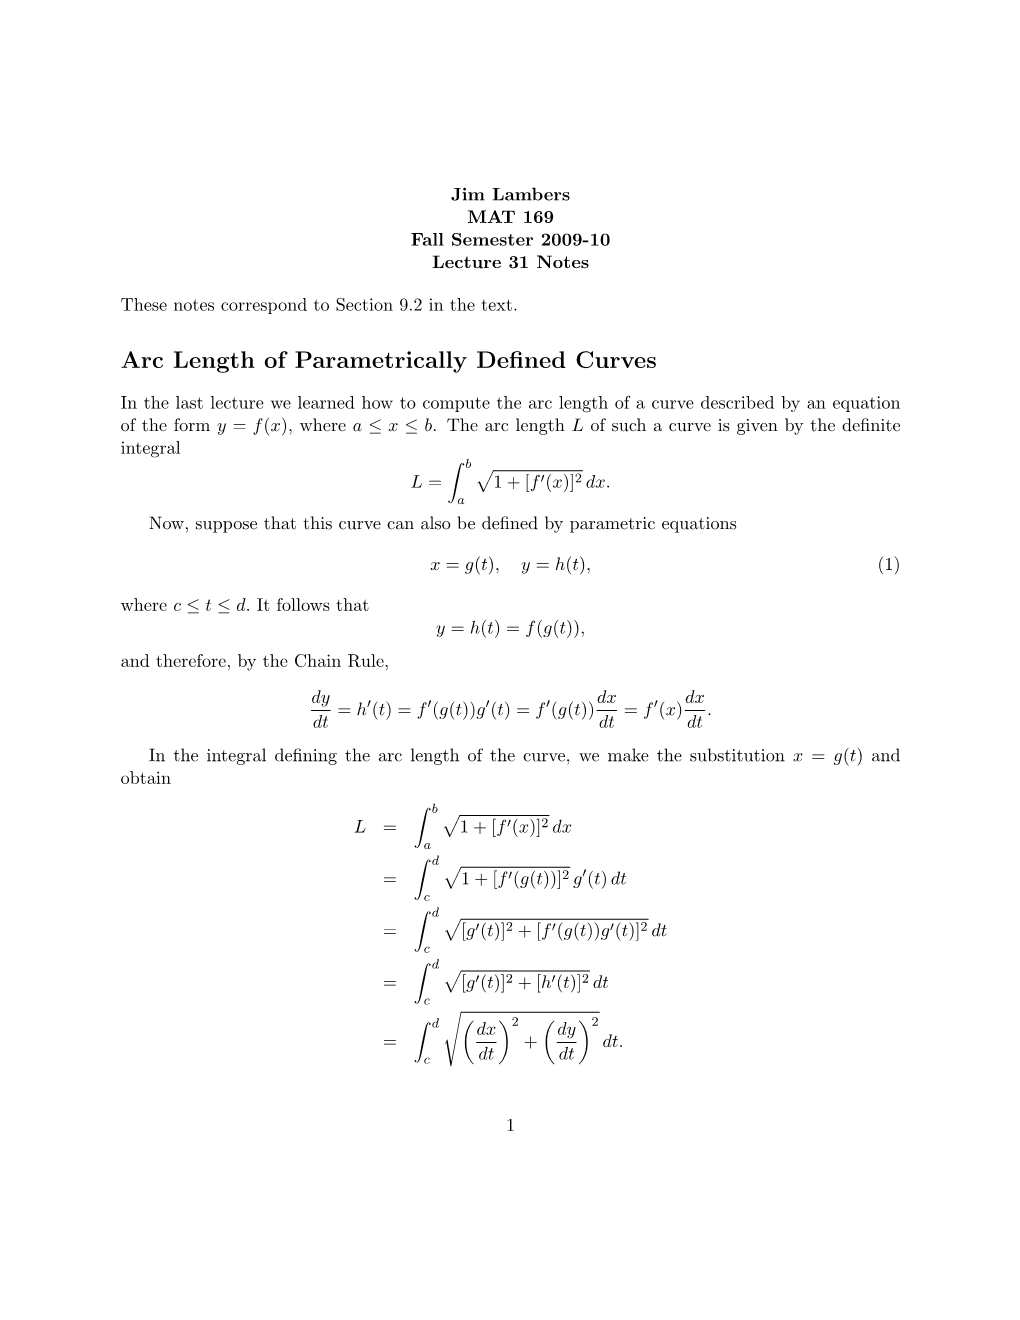 Arc Length of Parametrically Defined Curves